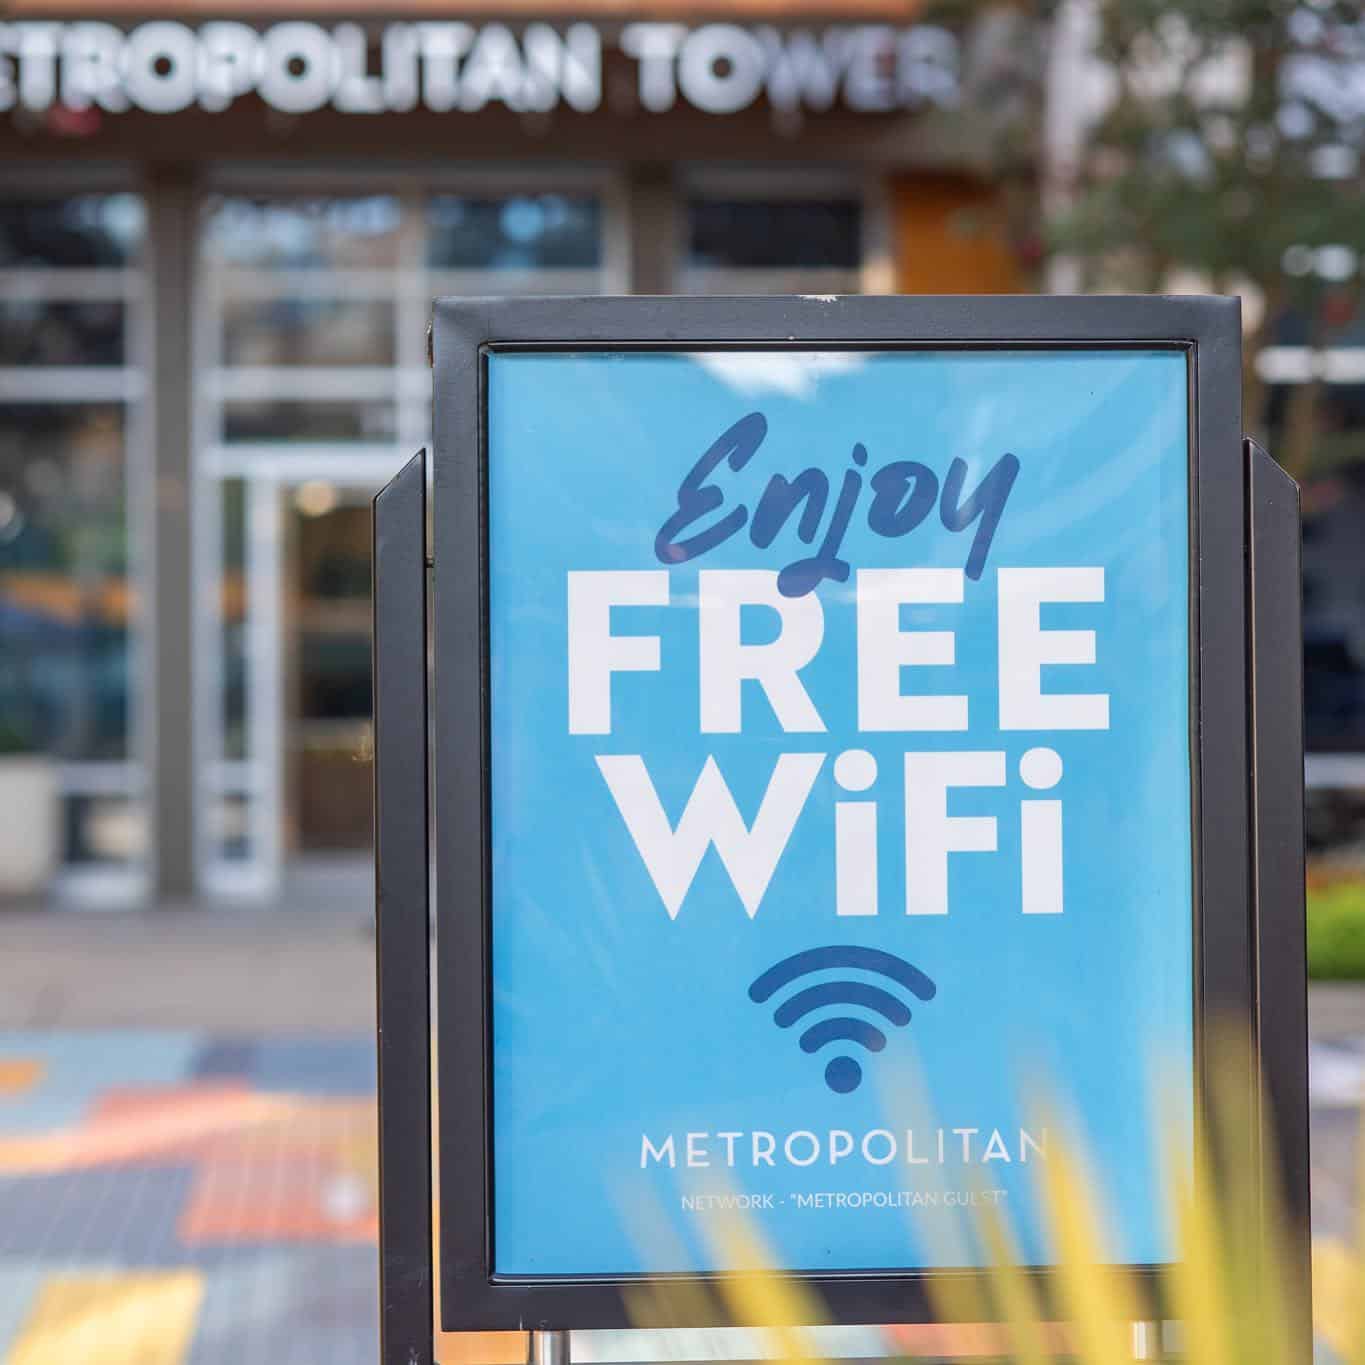 It's officially the perfect weather to work outside on our patio ️ Did you know we have free WiFi so you can work, meet or scroll with ease?